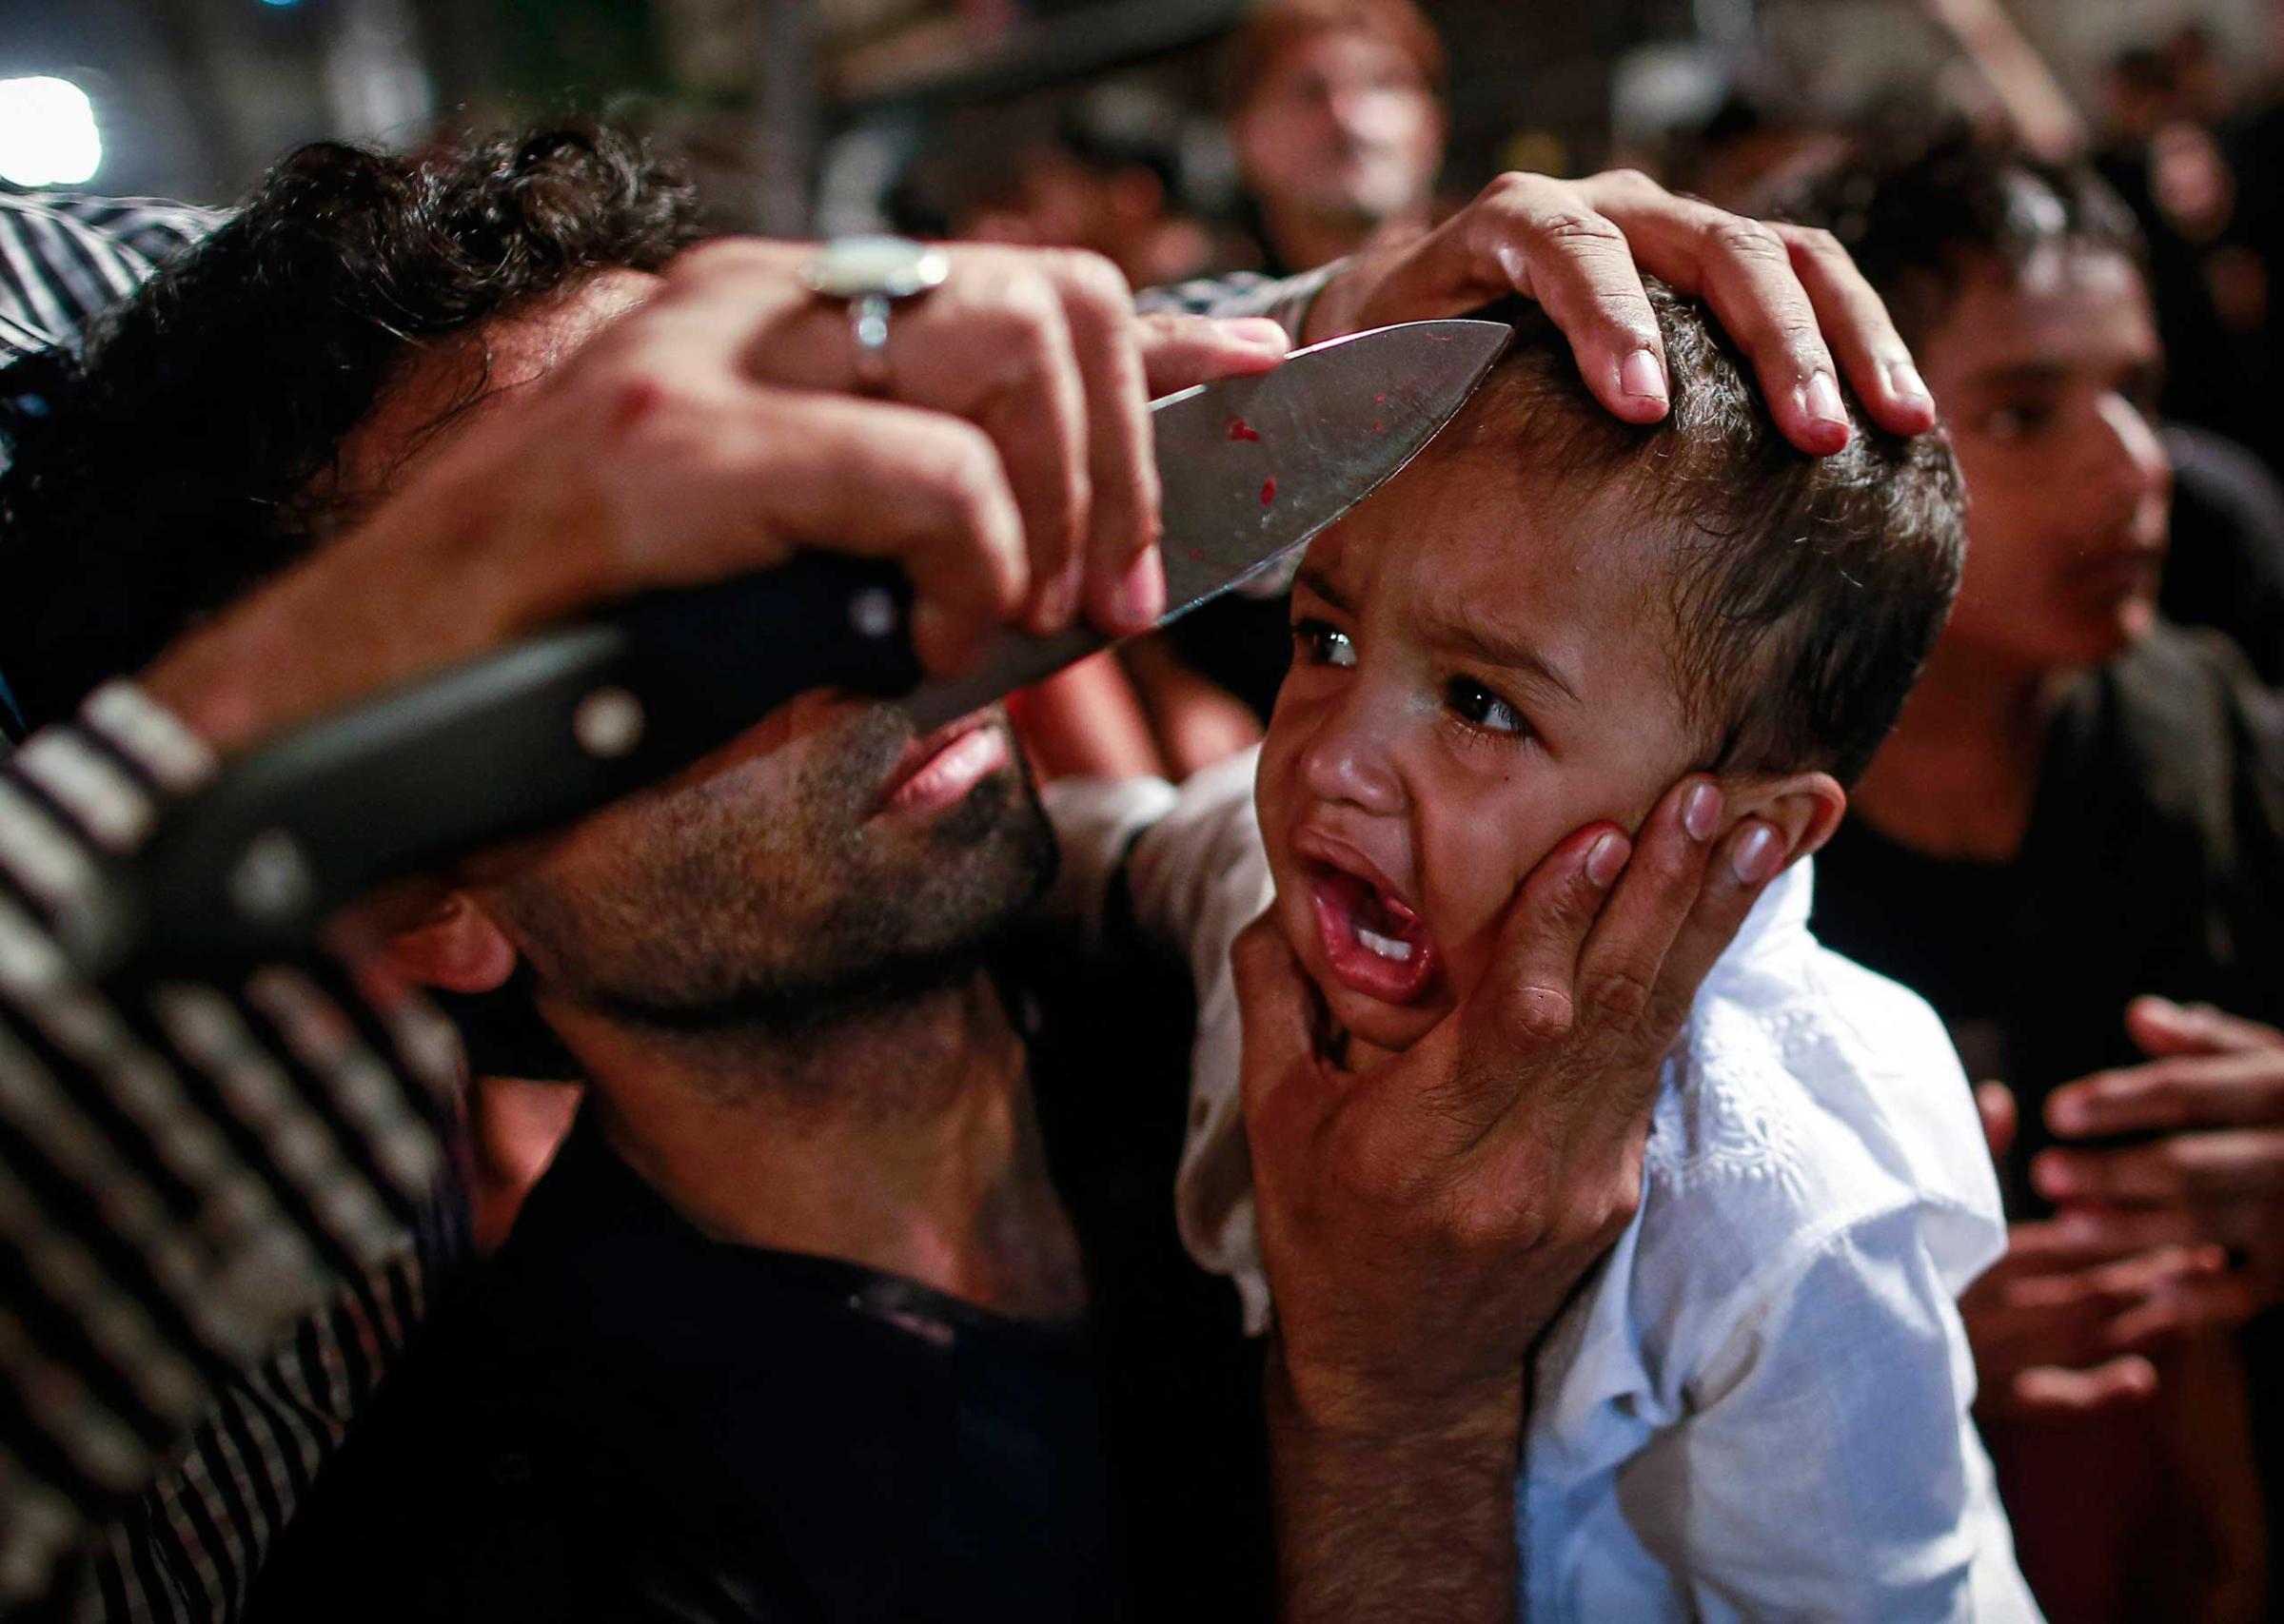 A Shi'ite Muslim has his child gashed with a knife during a Muharram procession ahead of Ashoura in Mumbai